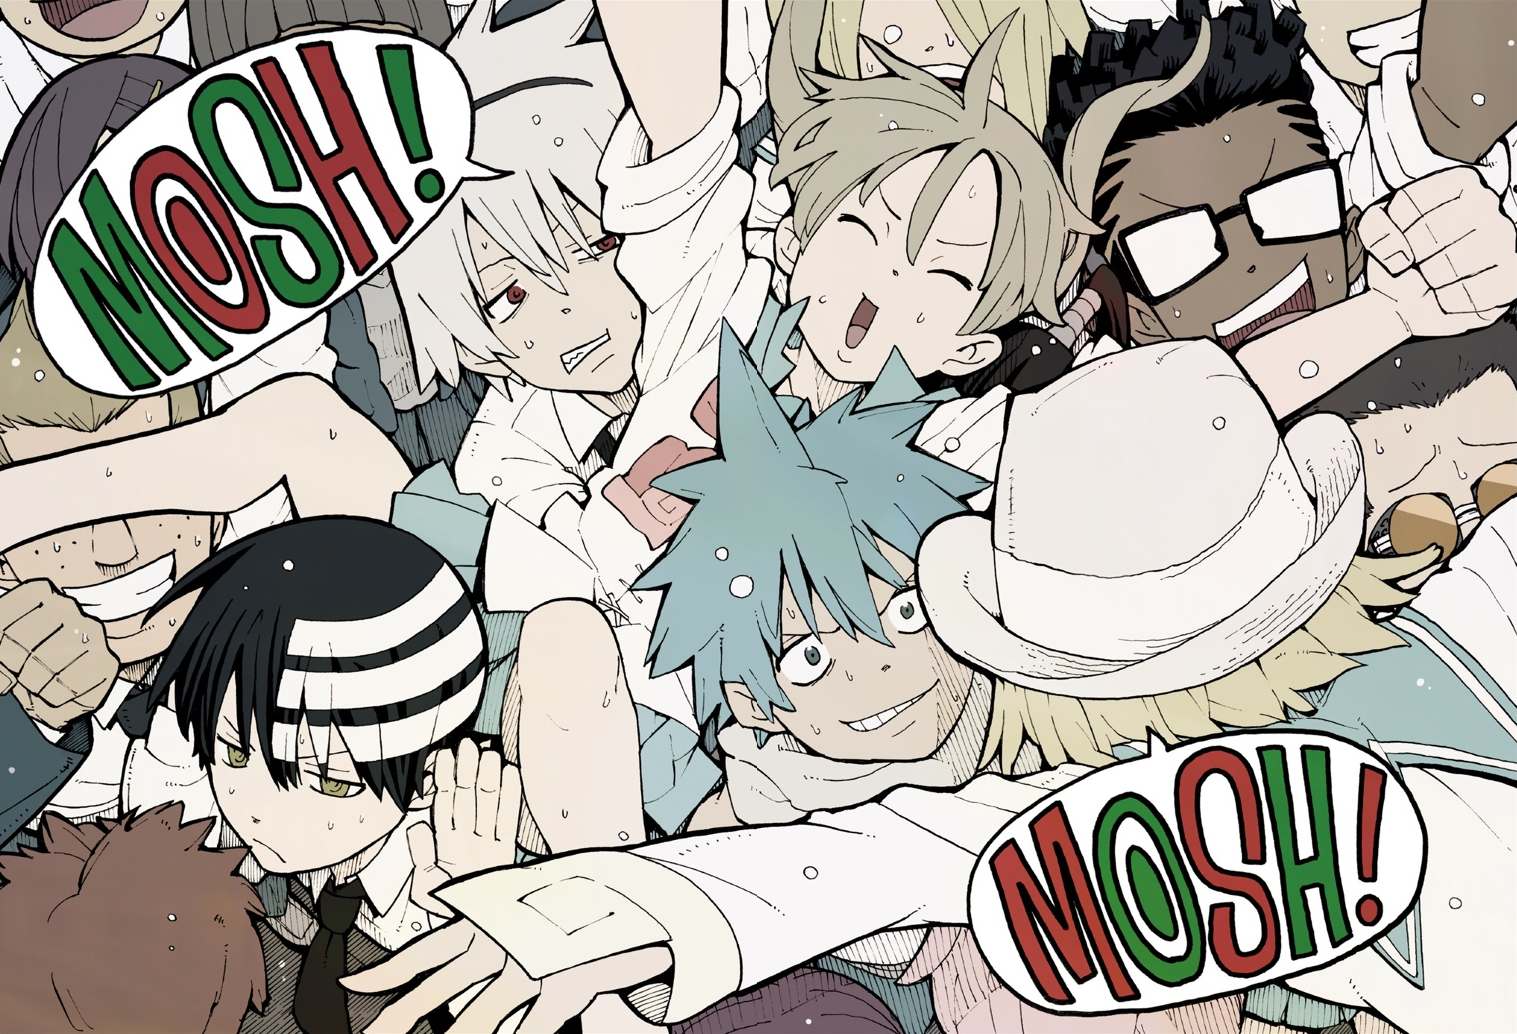 Chapter 20, Soul Eater Wiki